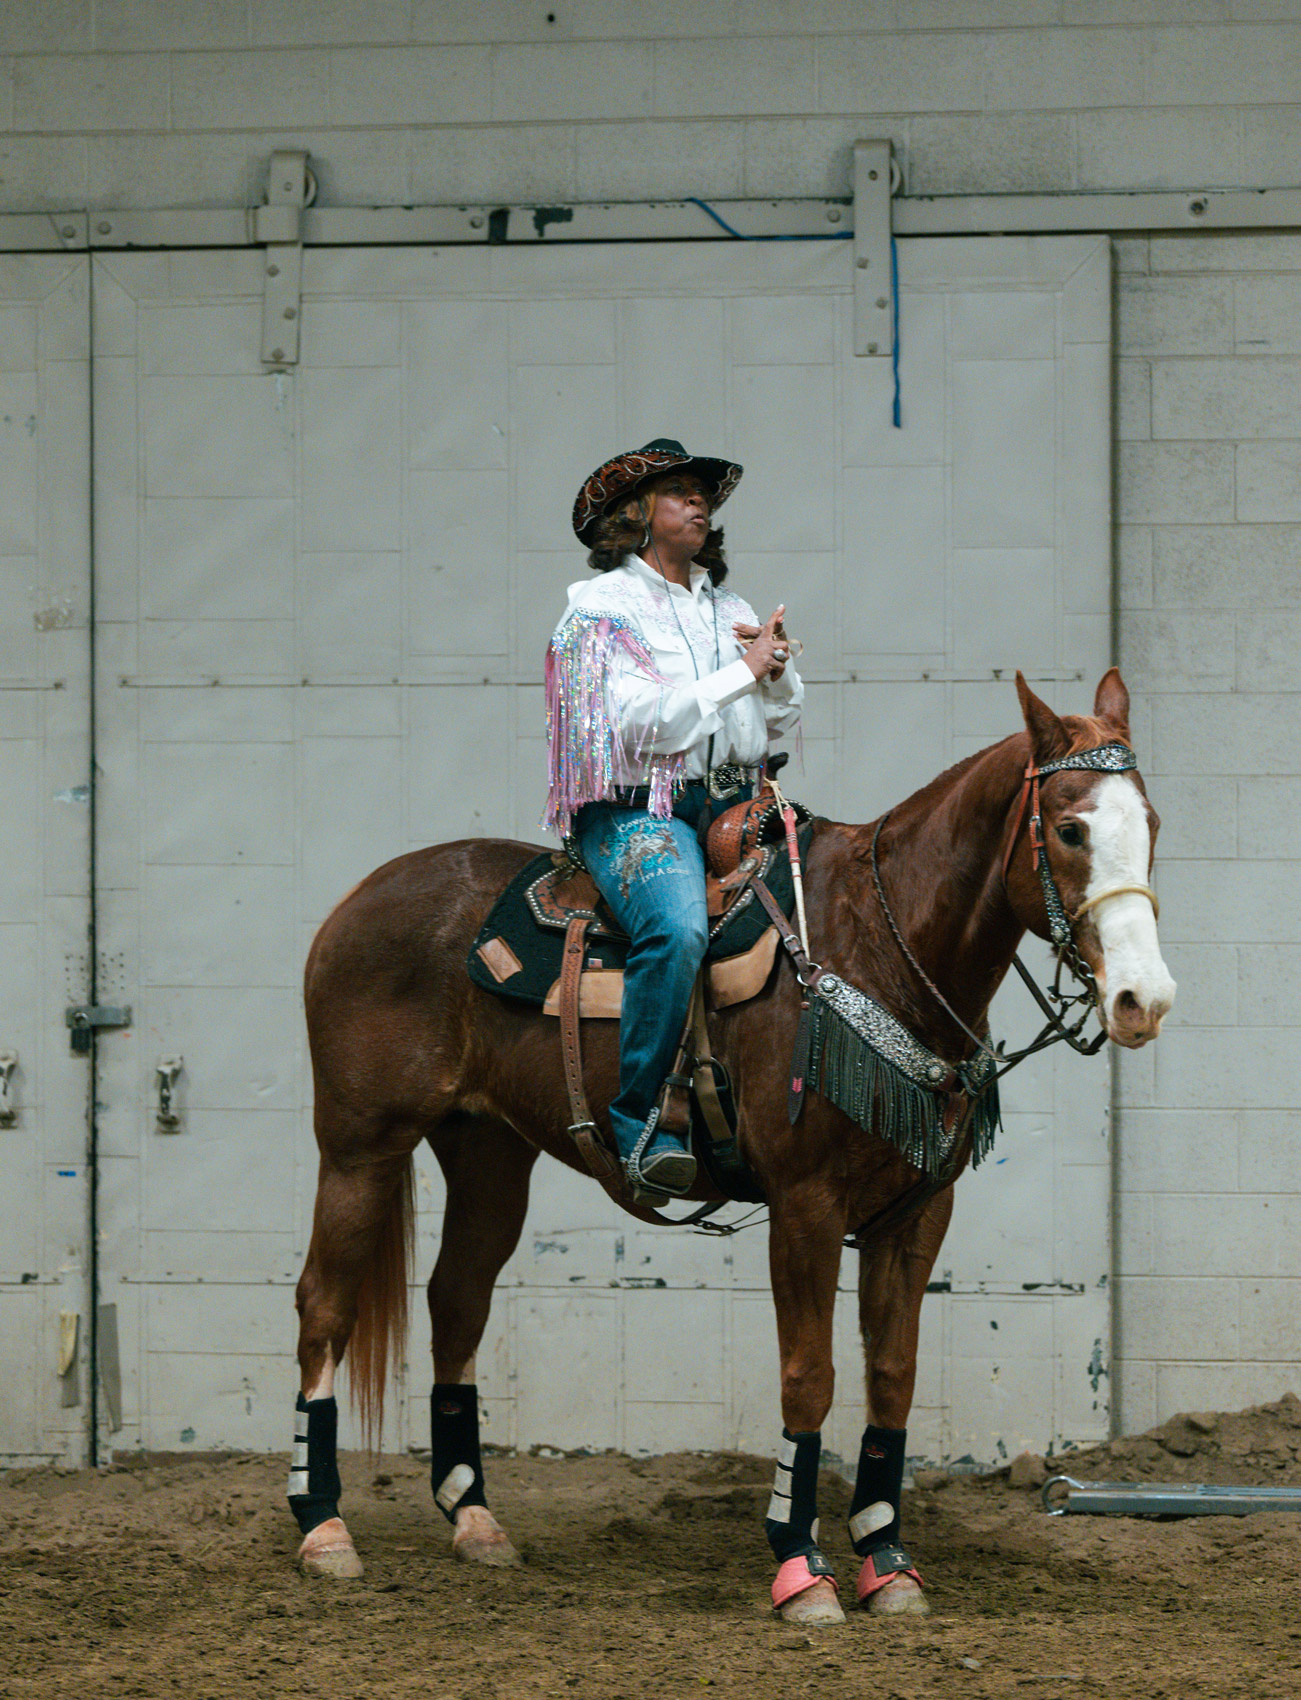 Cowgirl woman sitting on a horse